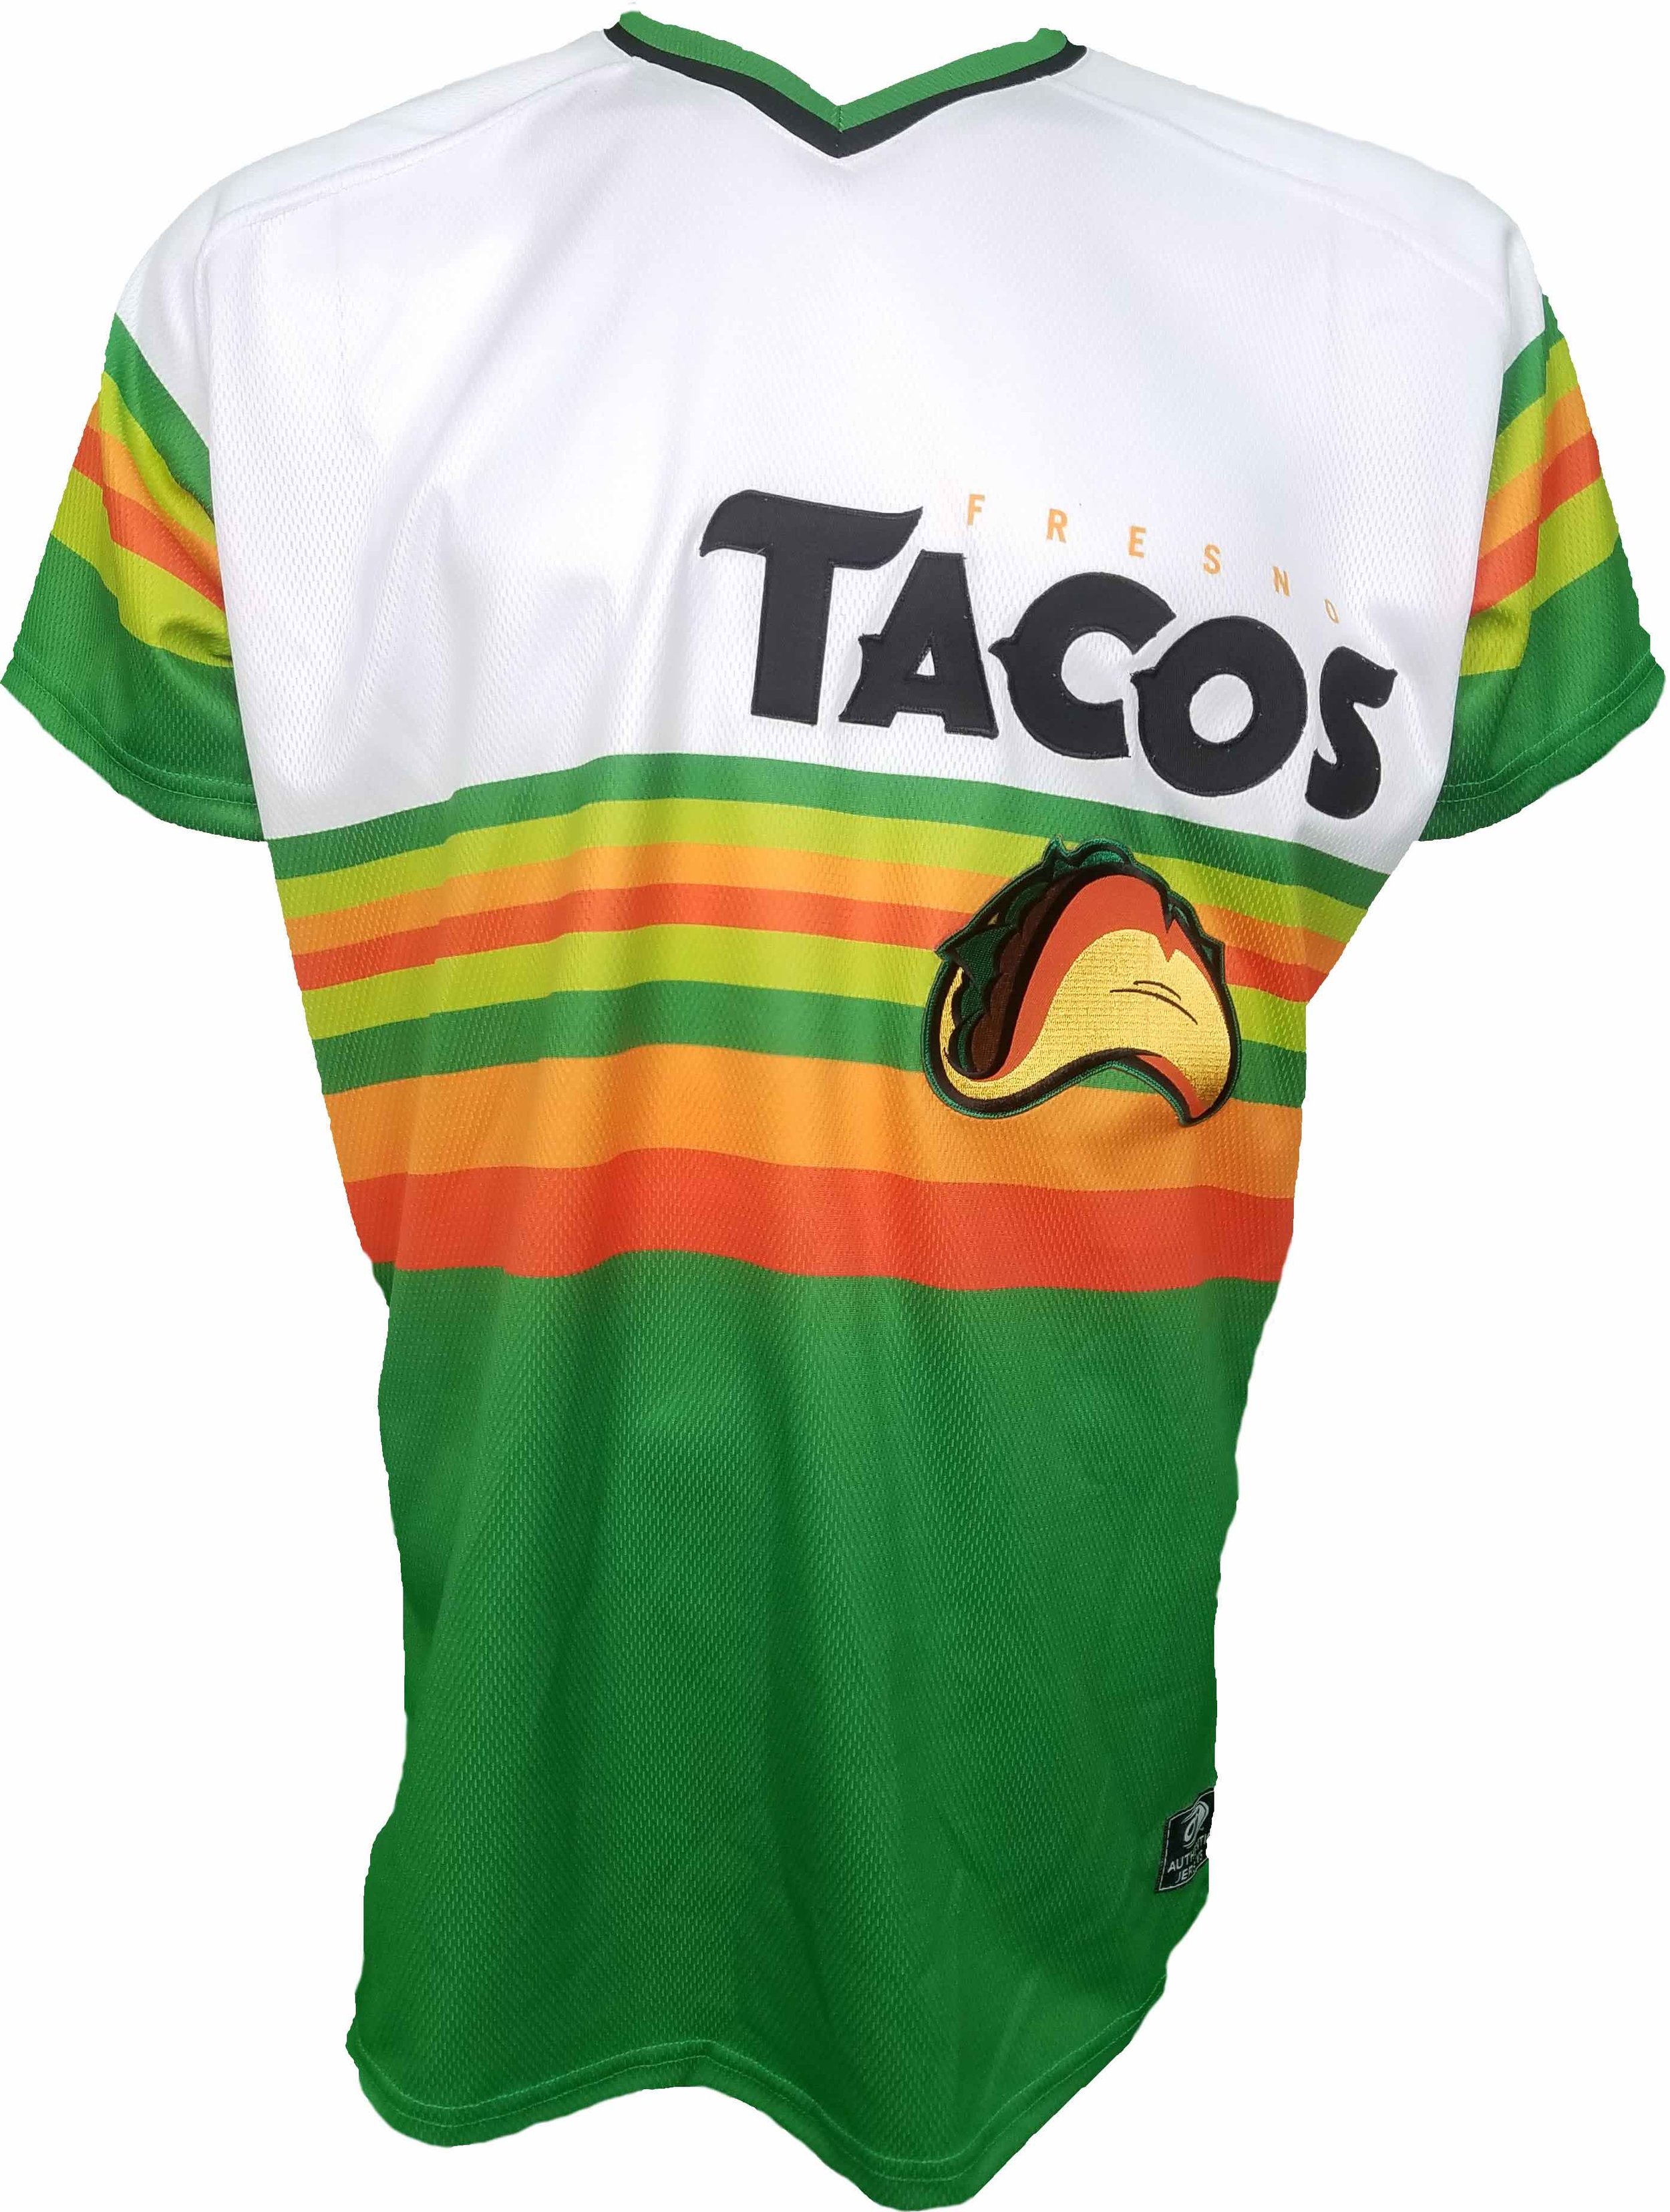 On #TacoTuesday, Fresno Grizzlies Taco the Town